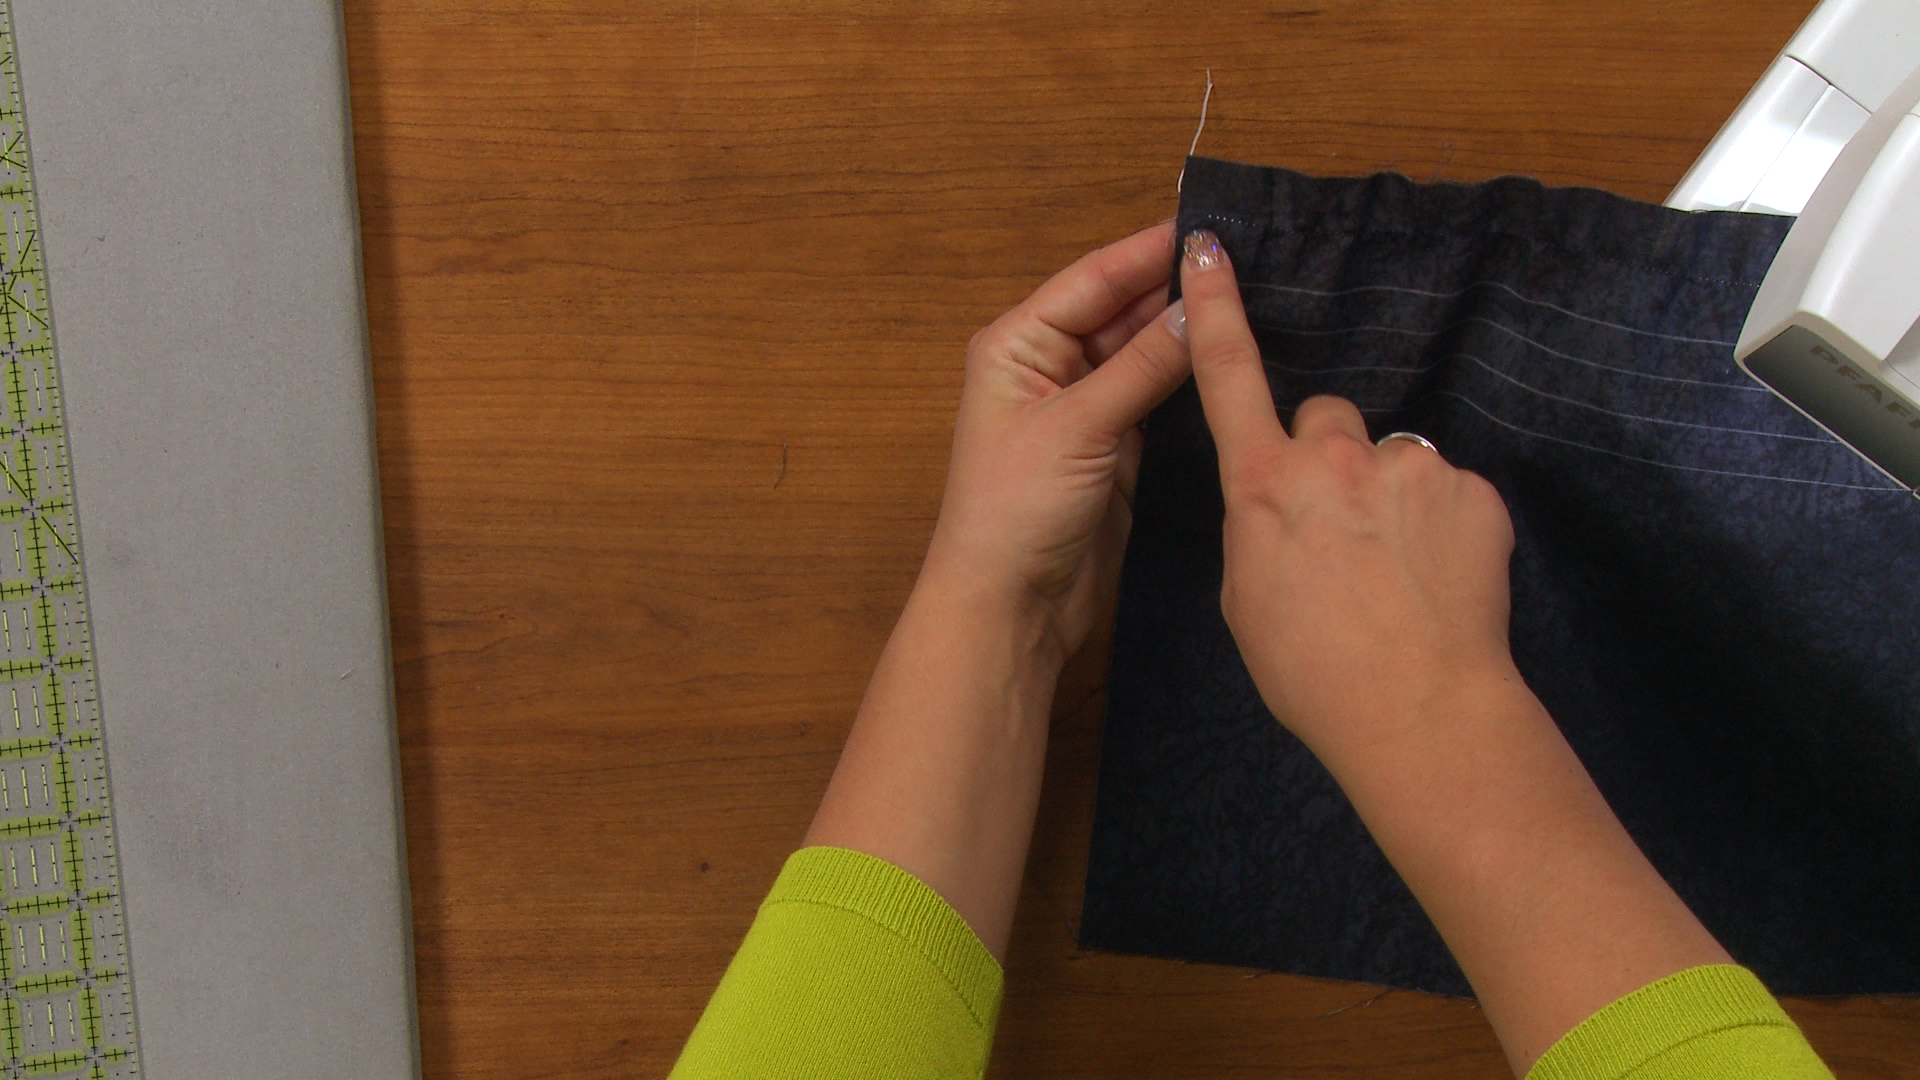 Session 4: How to Shirr Fabric with Elastic Thread